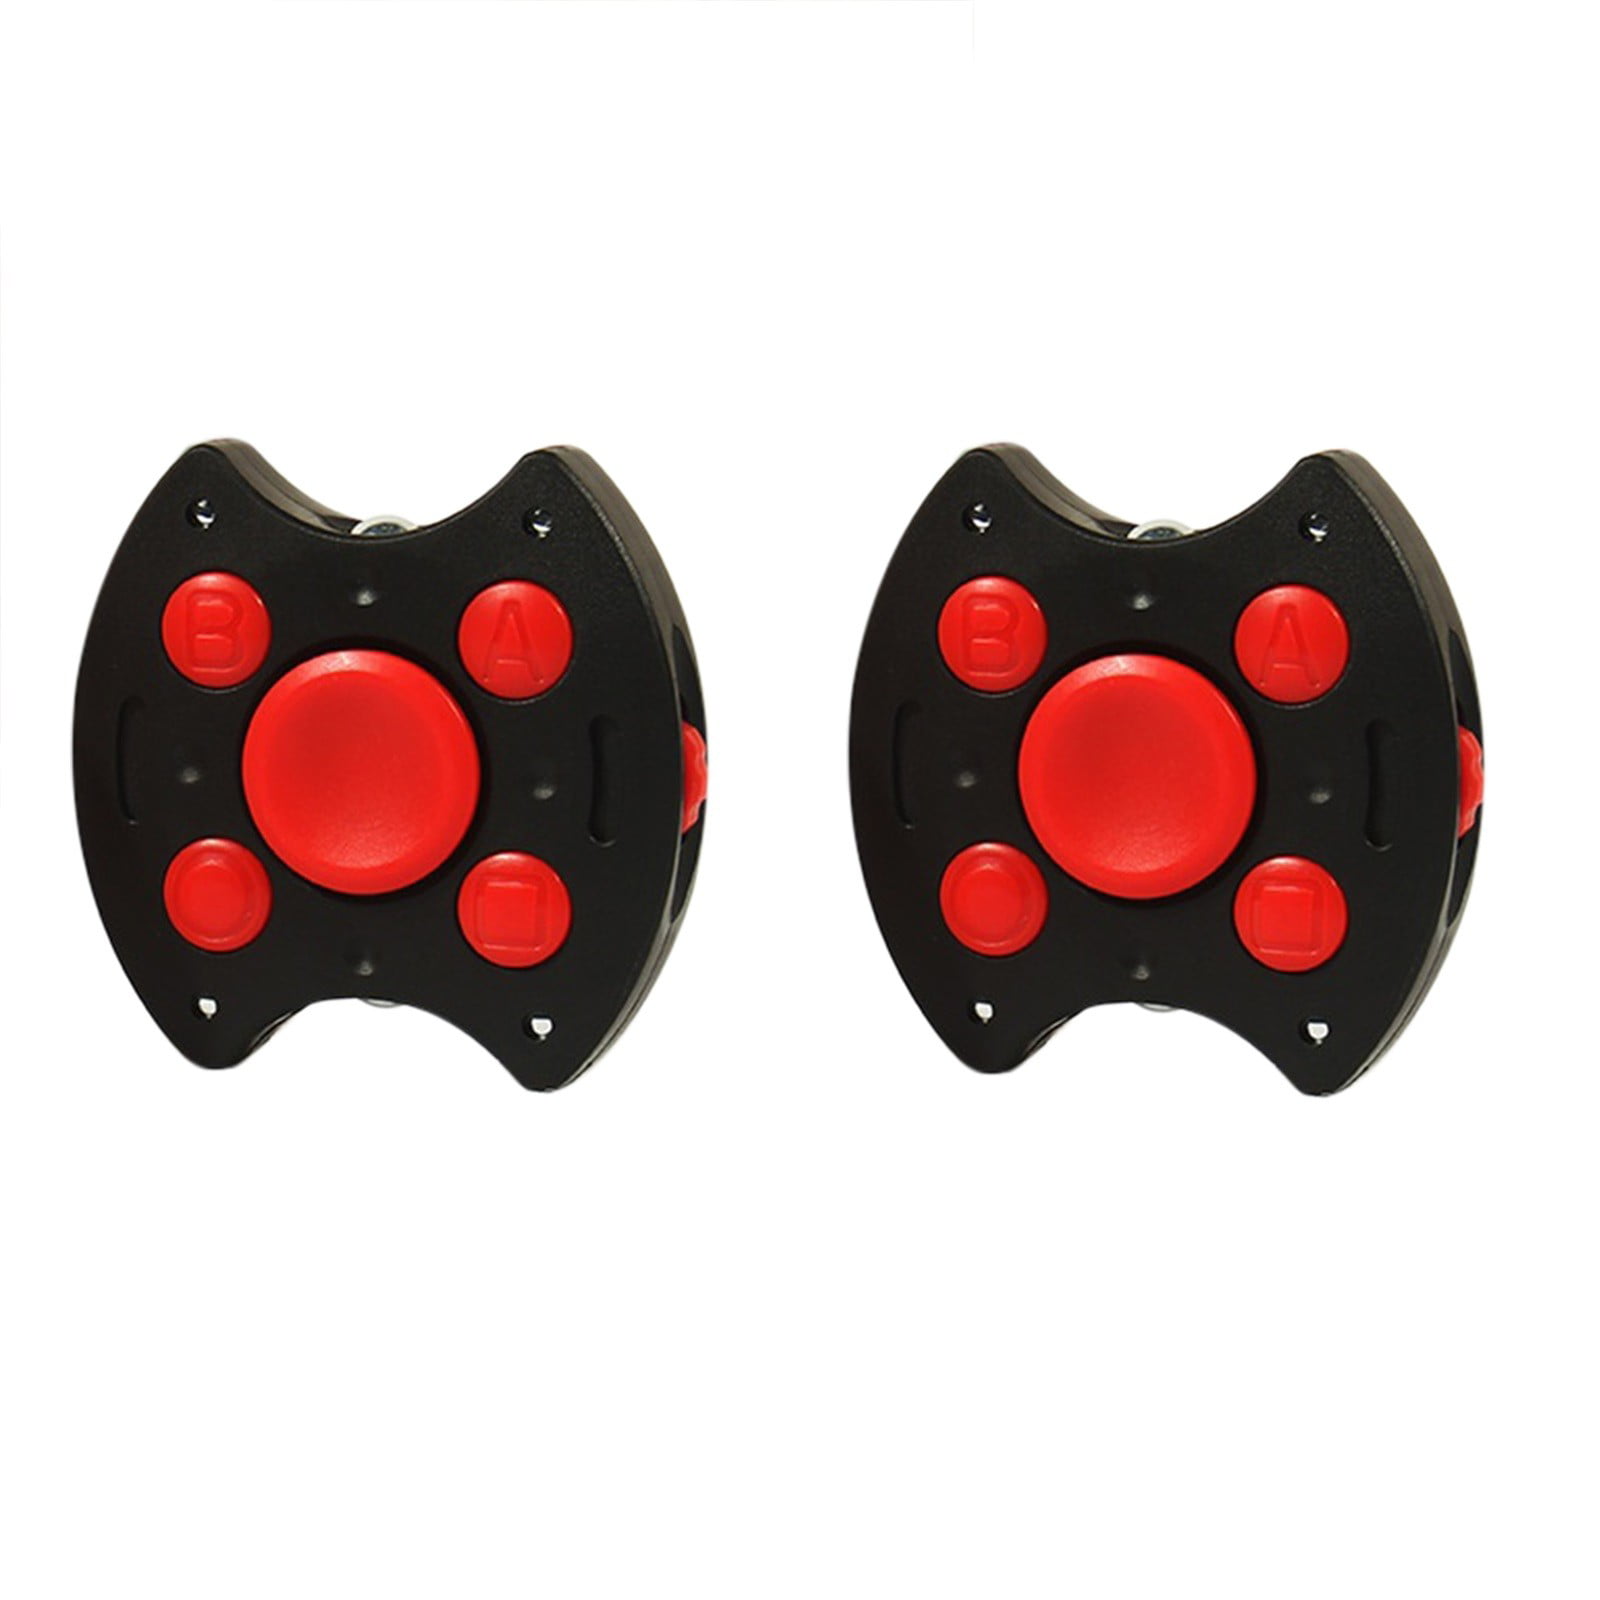 Details about   Fidget Pad Controller Game Toys ADHD Kids Anxiety Depression Stress Relief 